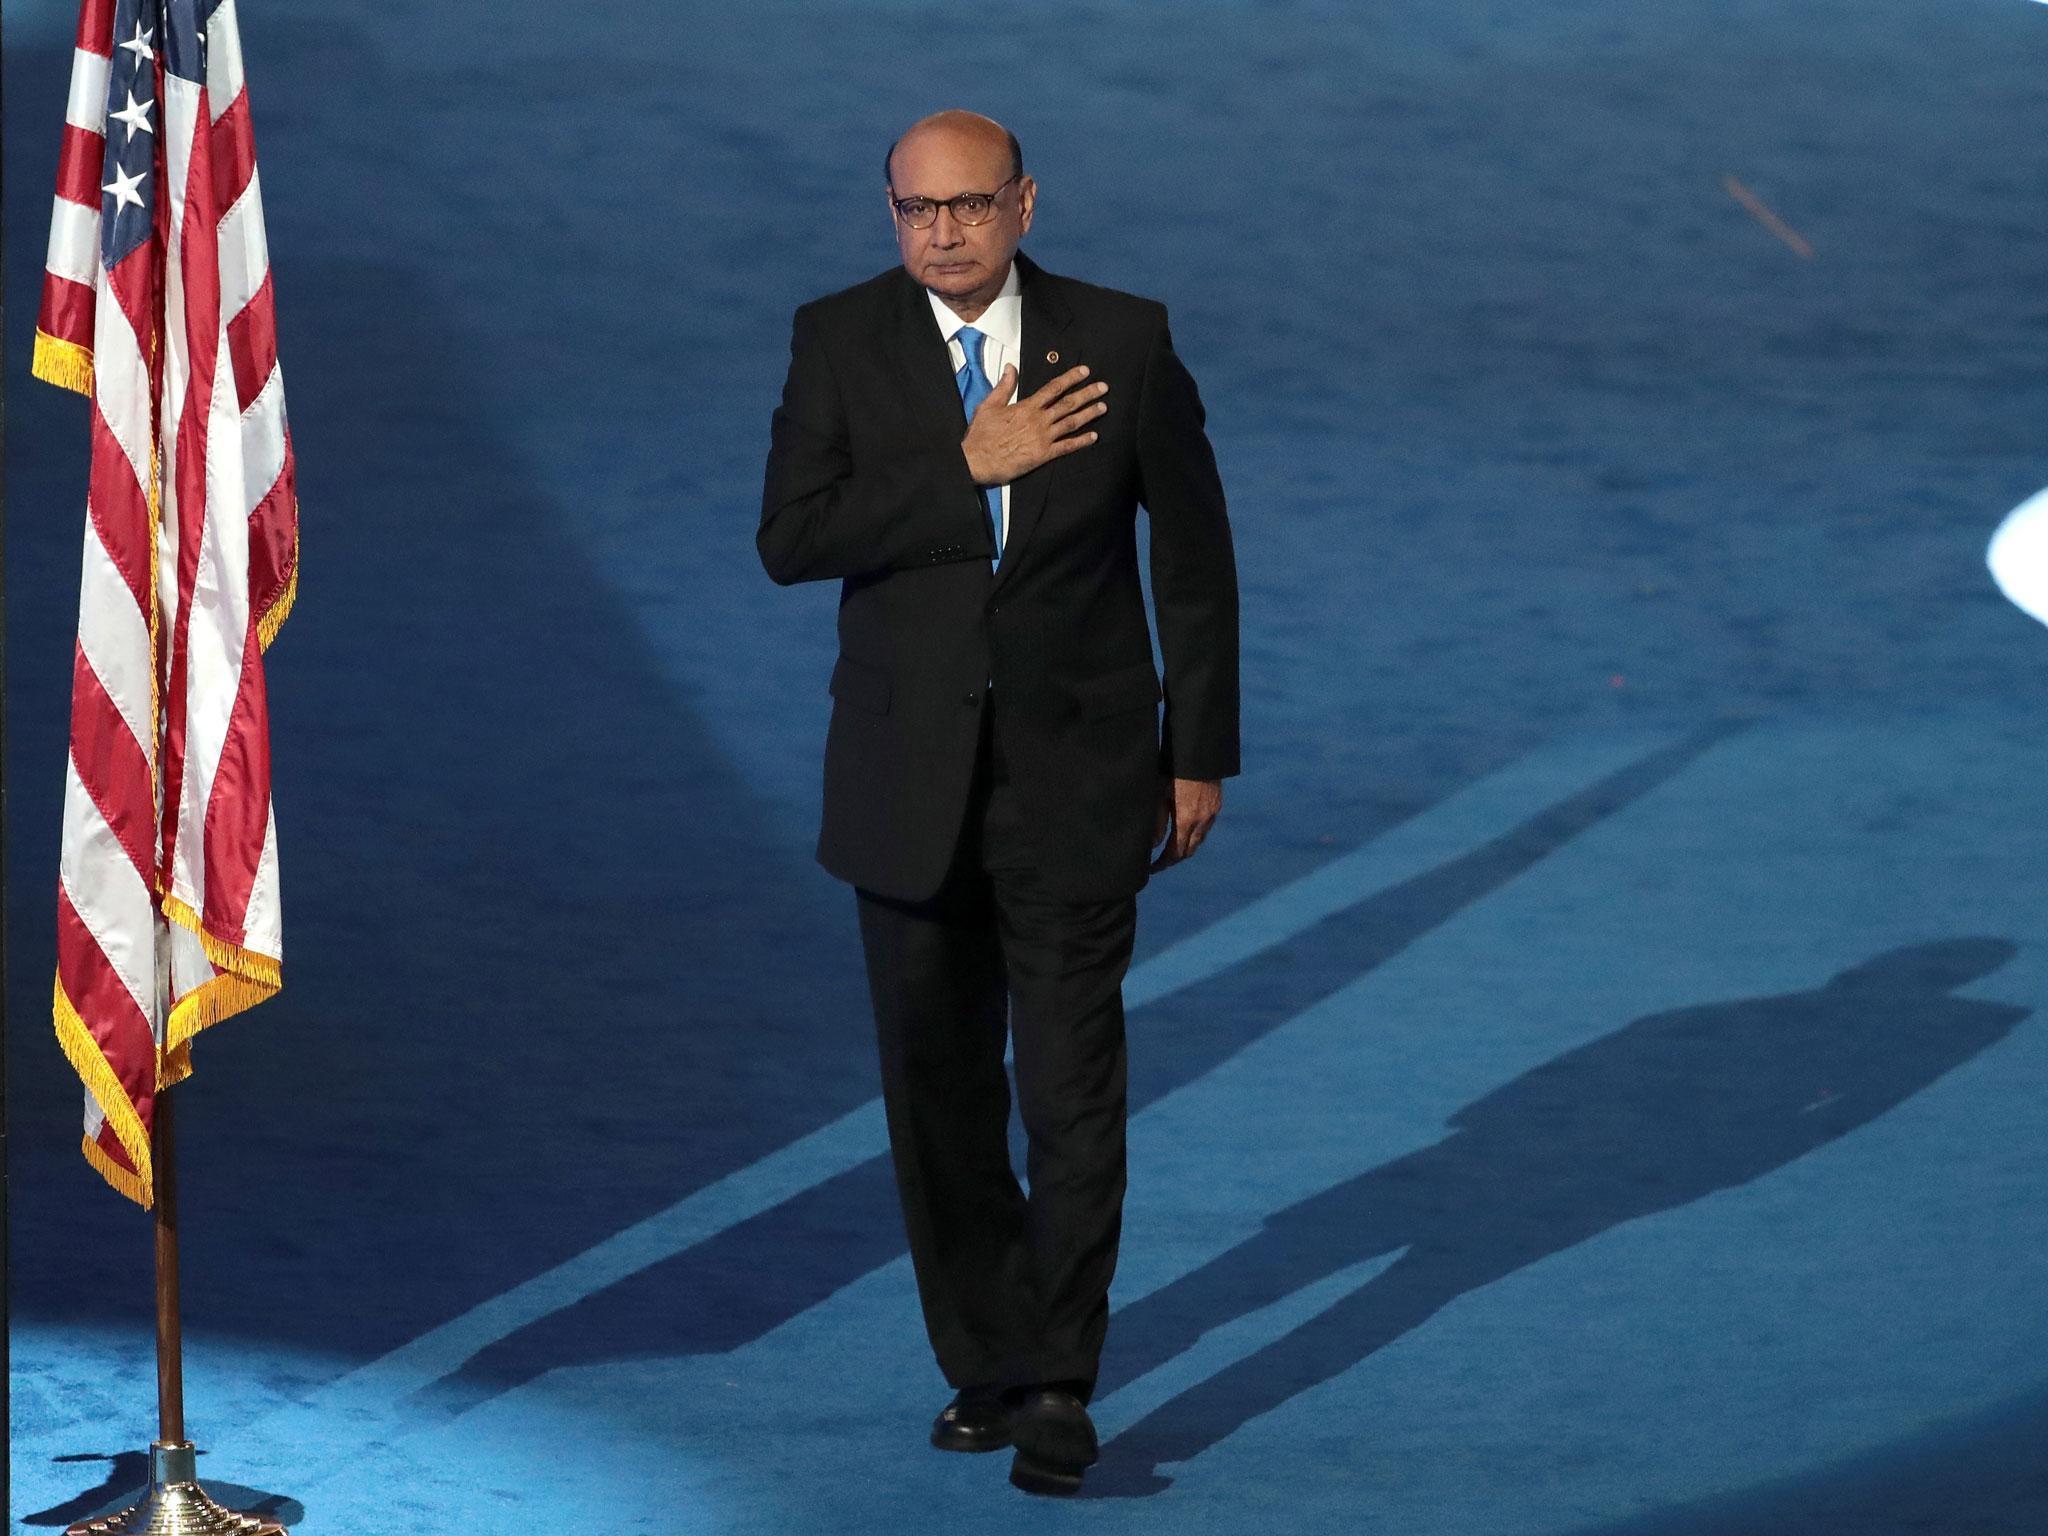 Khizr Khan said he wanted to extend his deepest gratitude to the men and women who serve in the armed forces